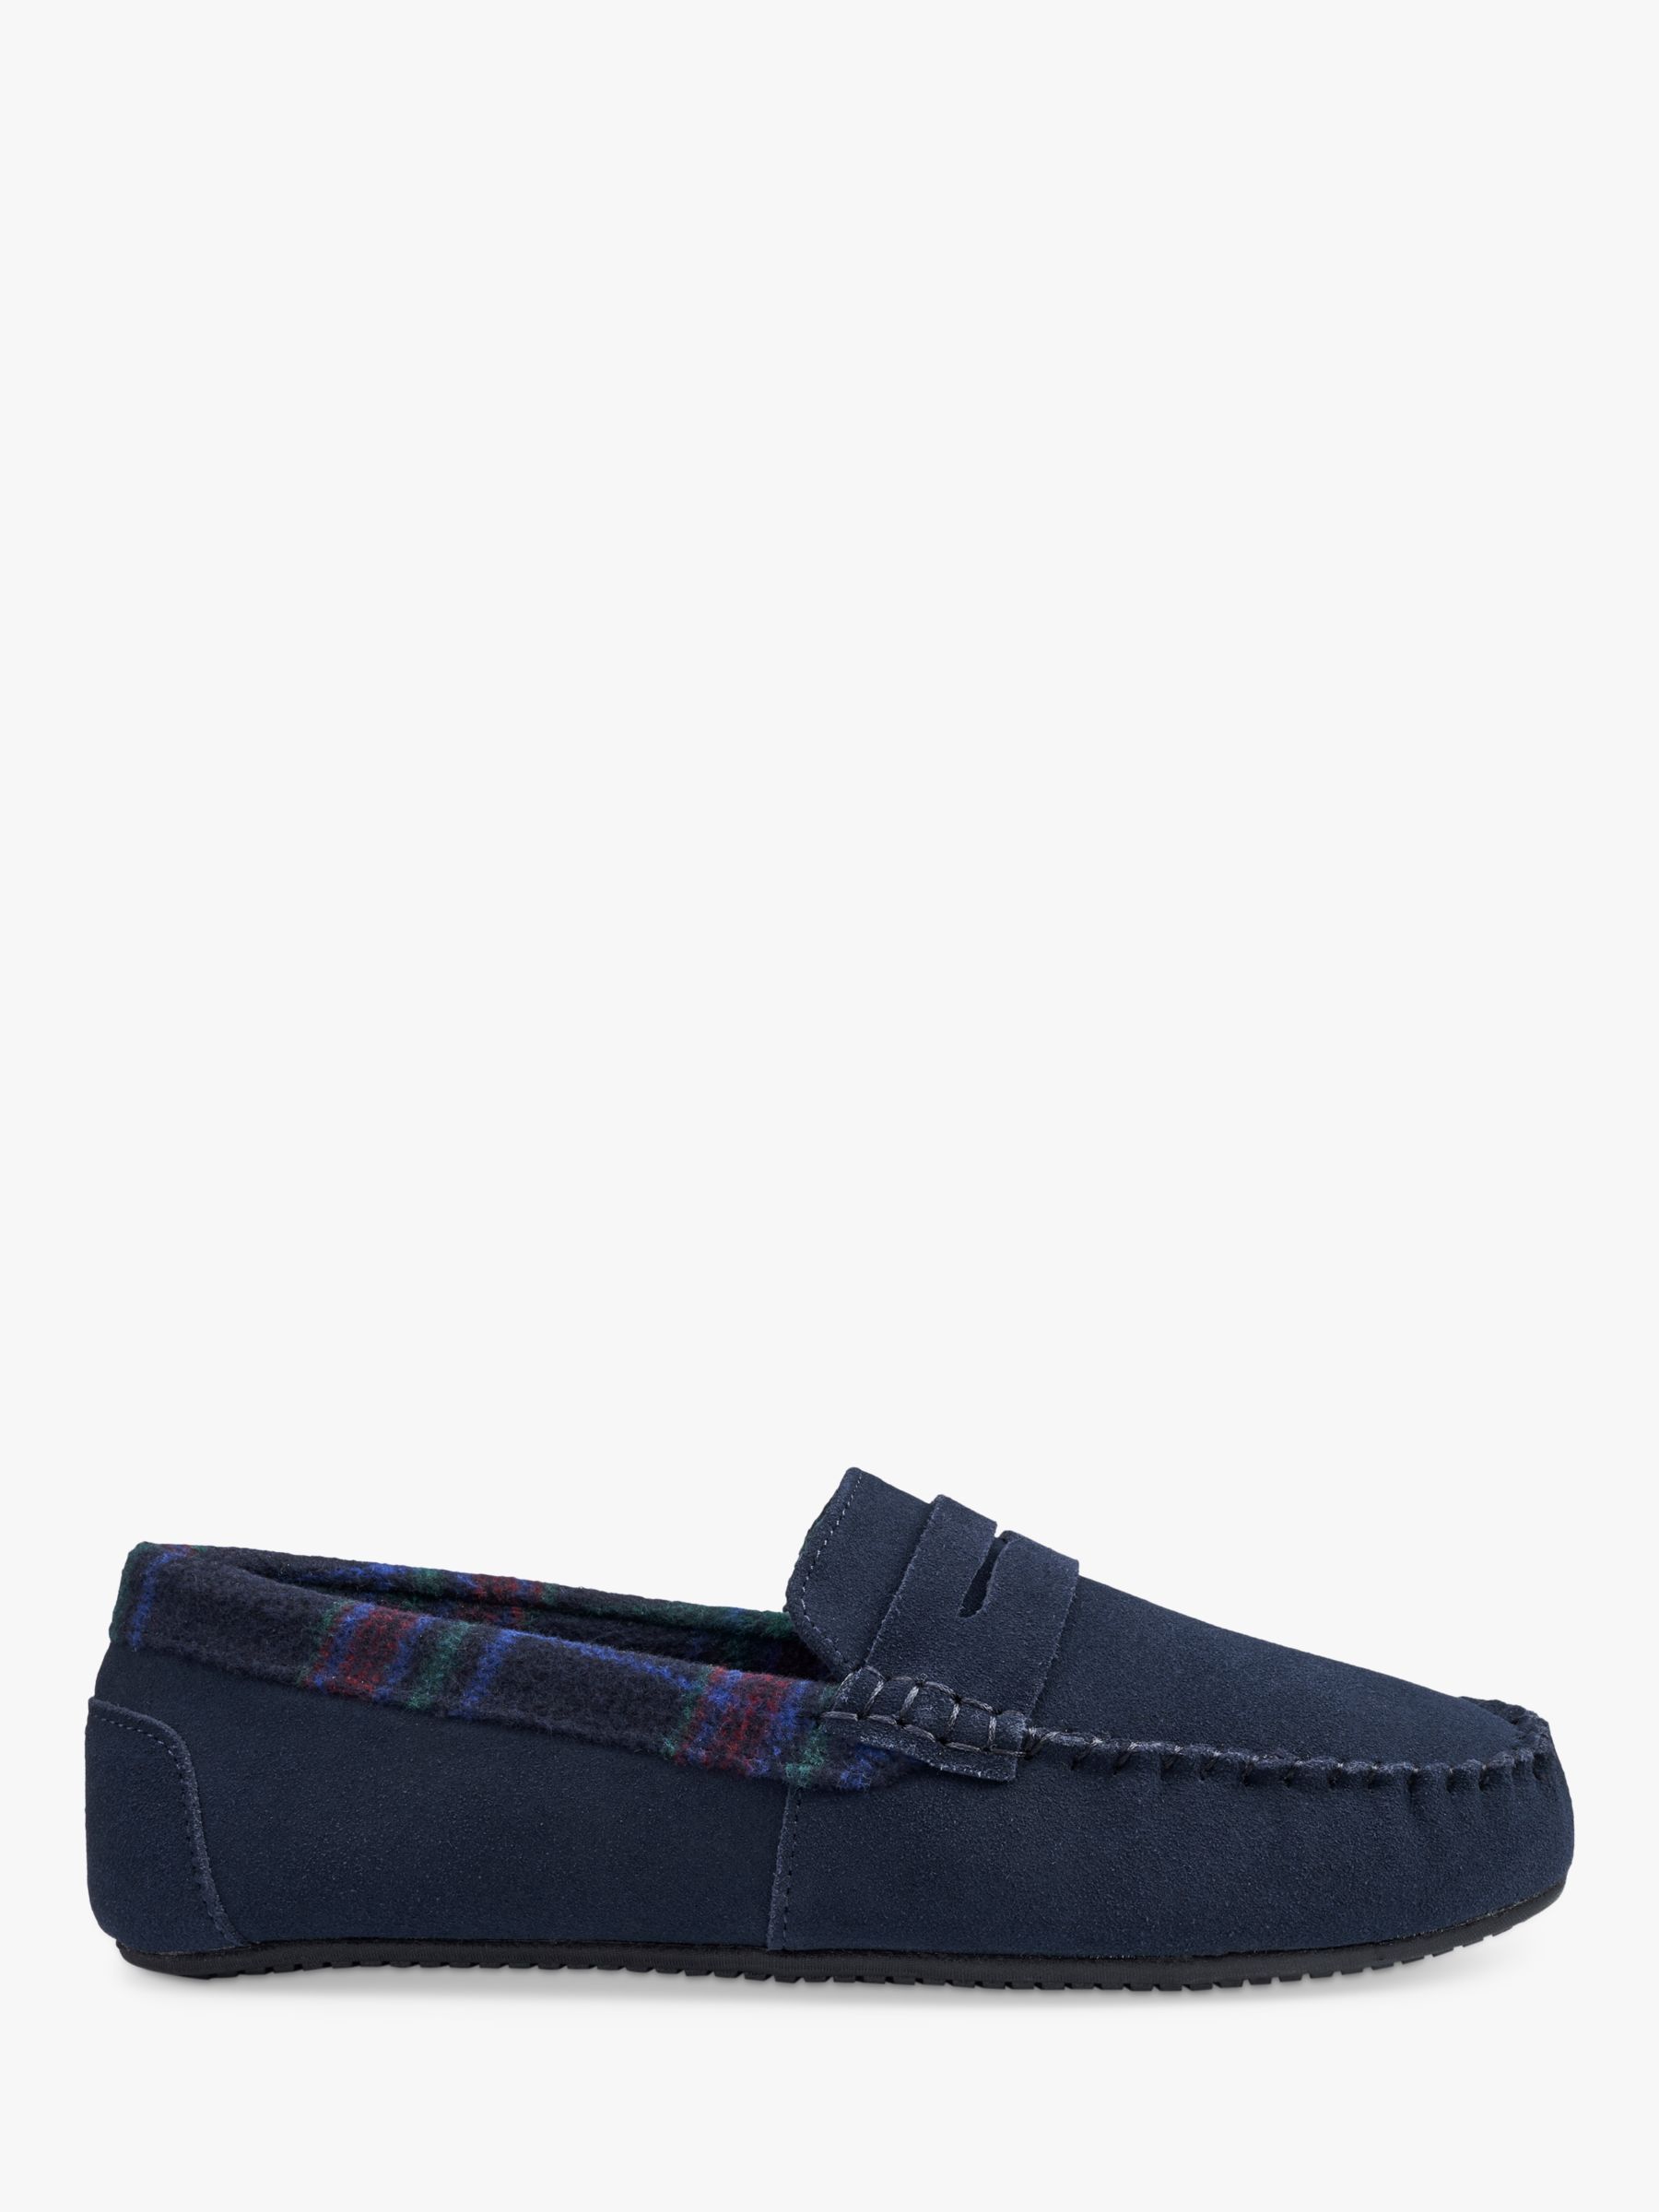 Buy Hotter Repose Moccasin Slippers Online at johnlewis.com